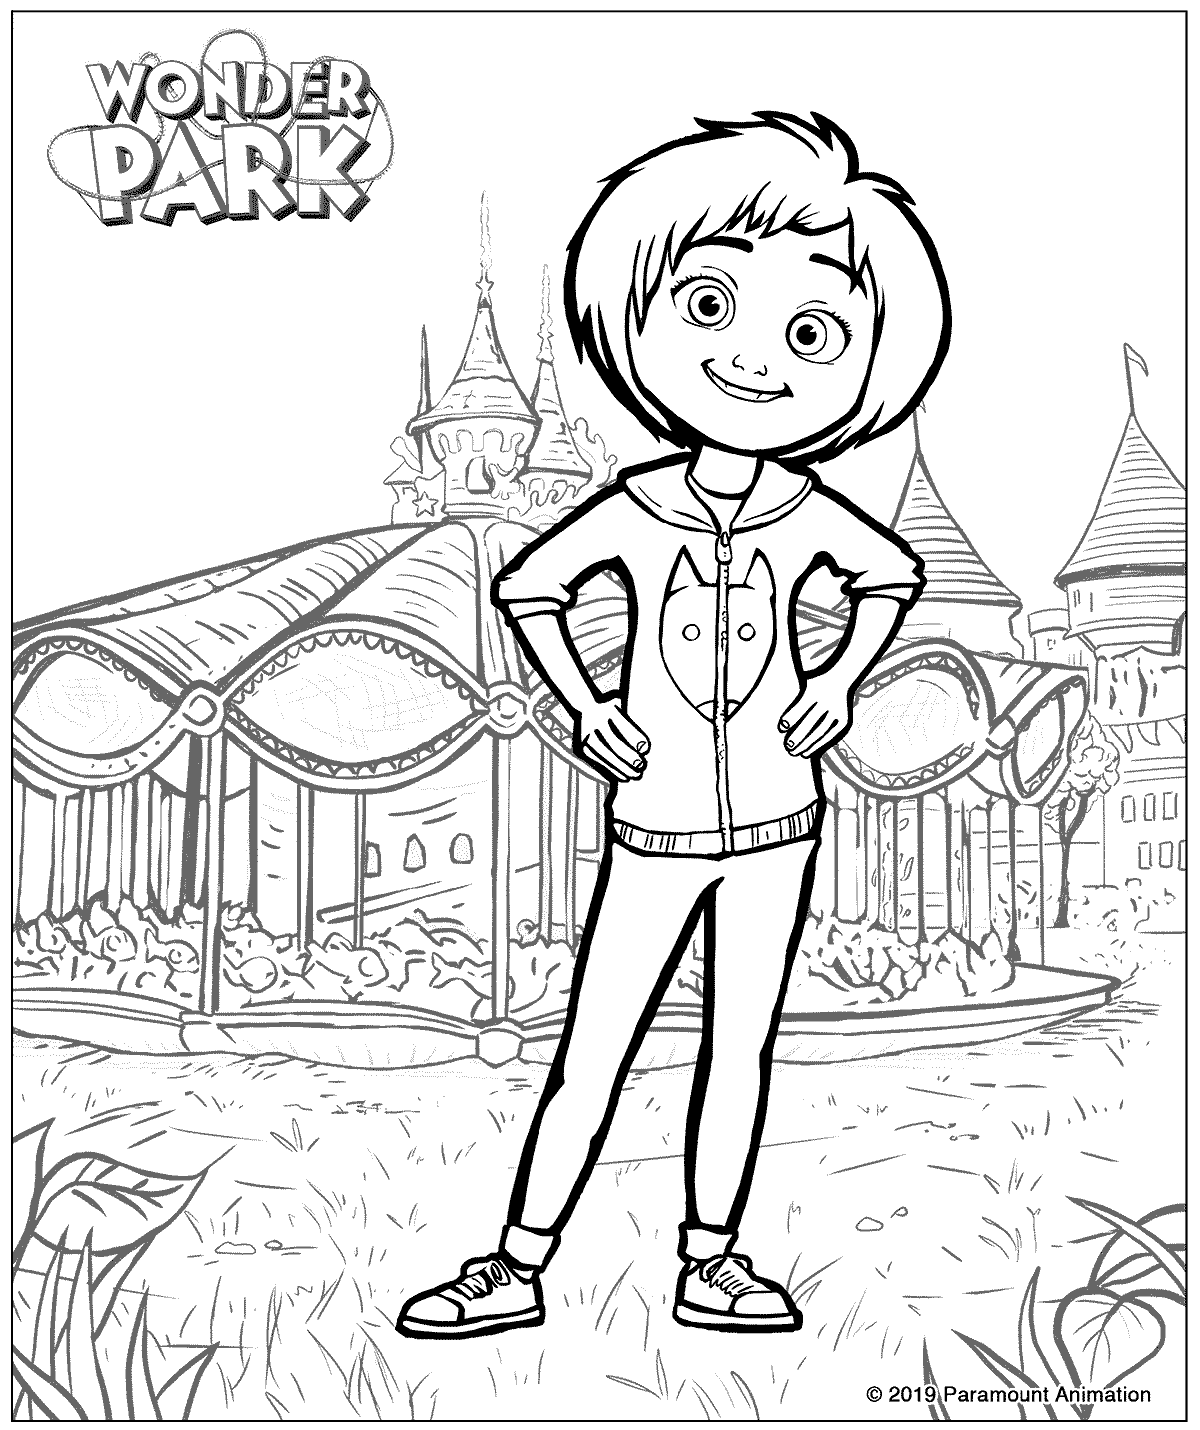 Wonder Park Coloring Pages - Best Coloring Pages For Kids1200 x 1430